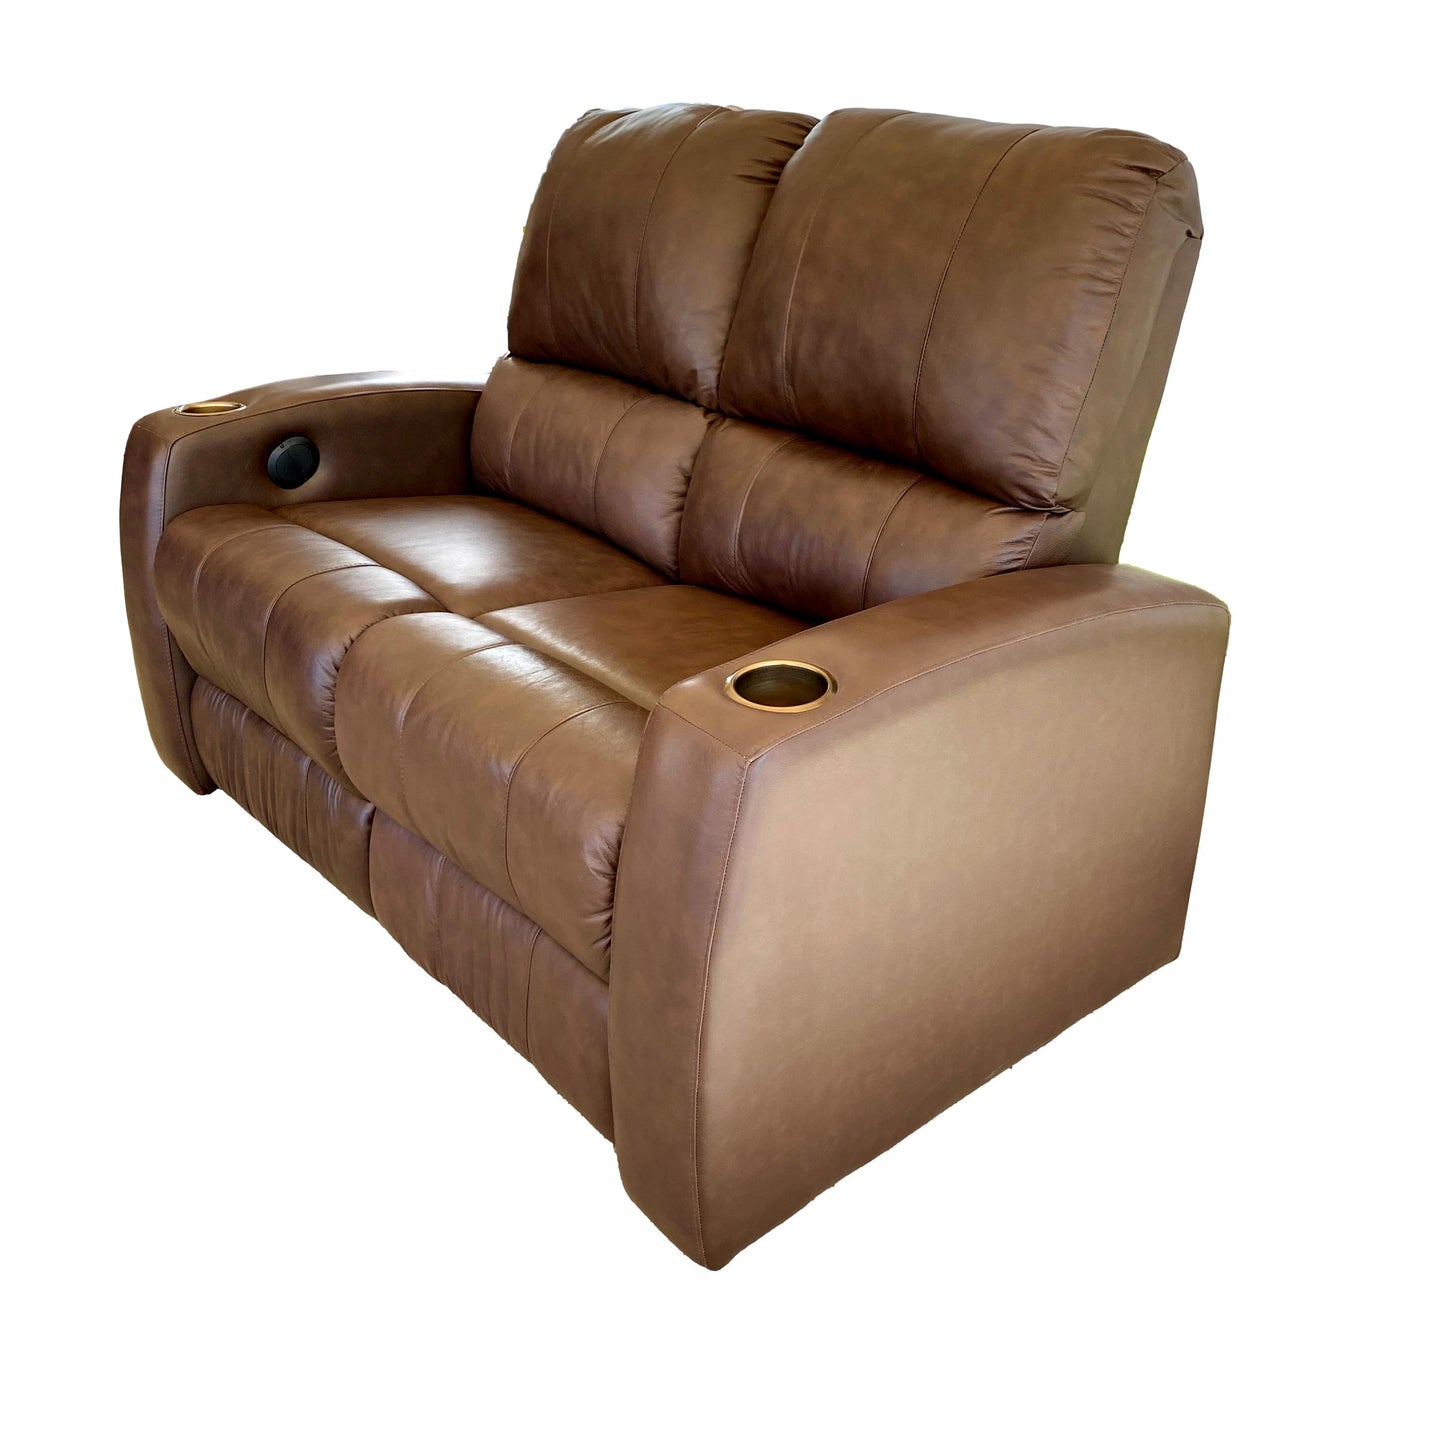 Leather Reclining Loveseat